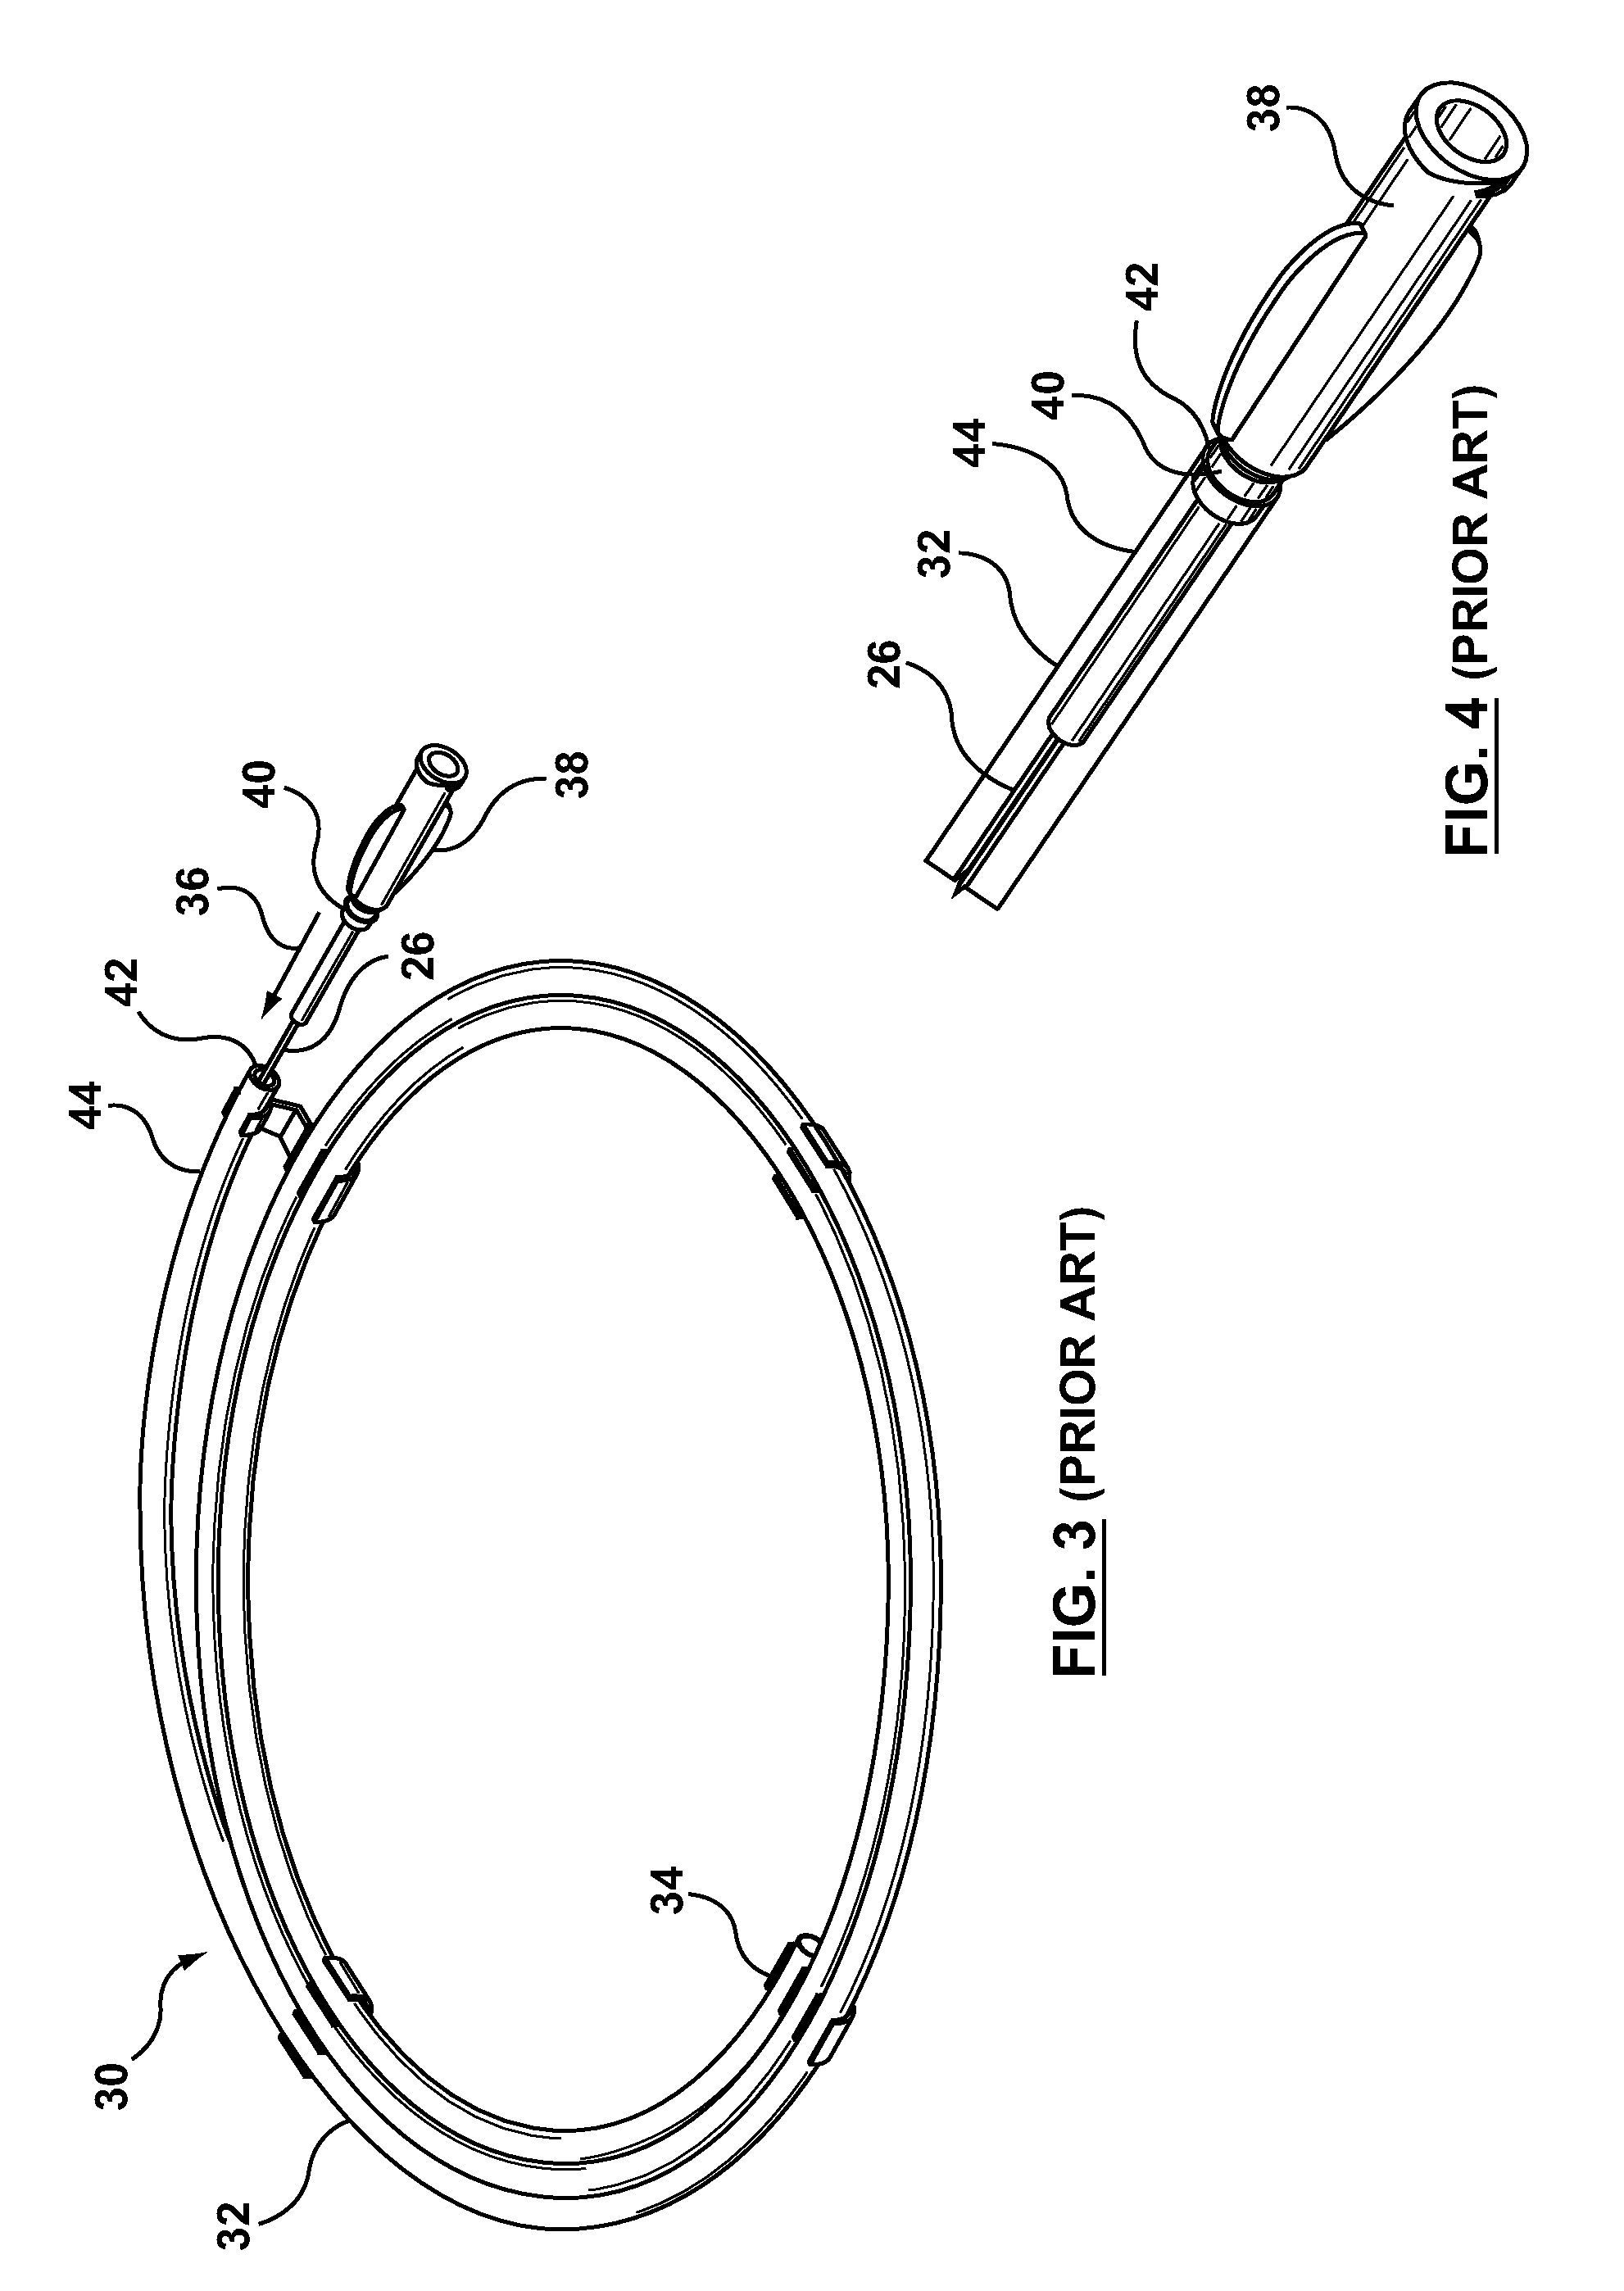 Packaging for a Catheter